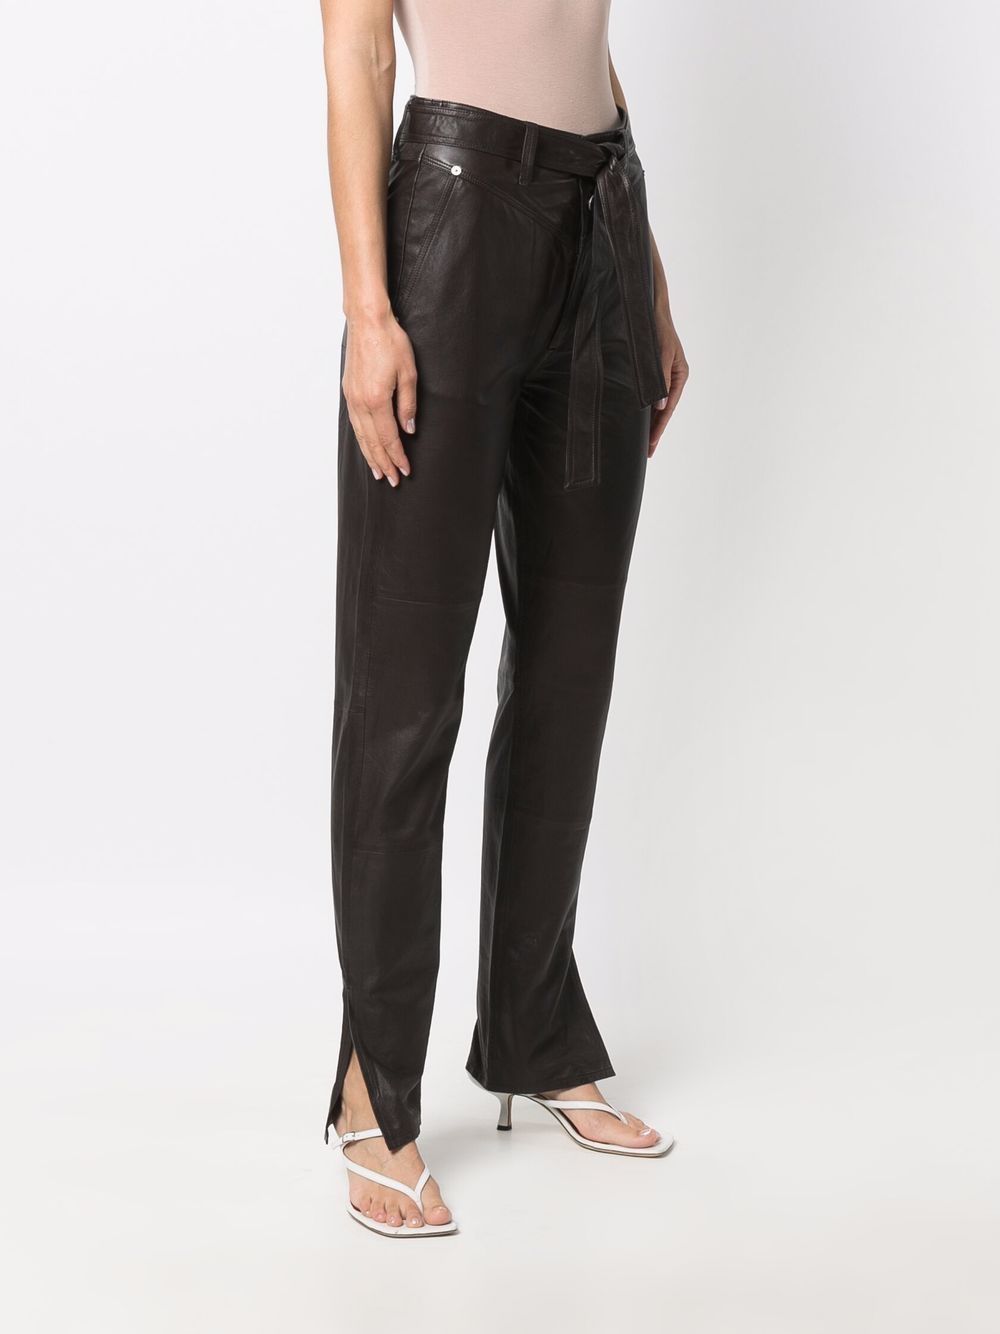 Shop Rag & Bone tie-waist leather trousers with Express Delivery - FARFETCH